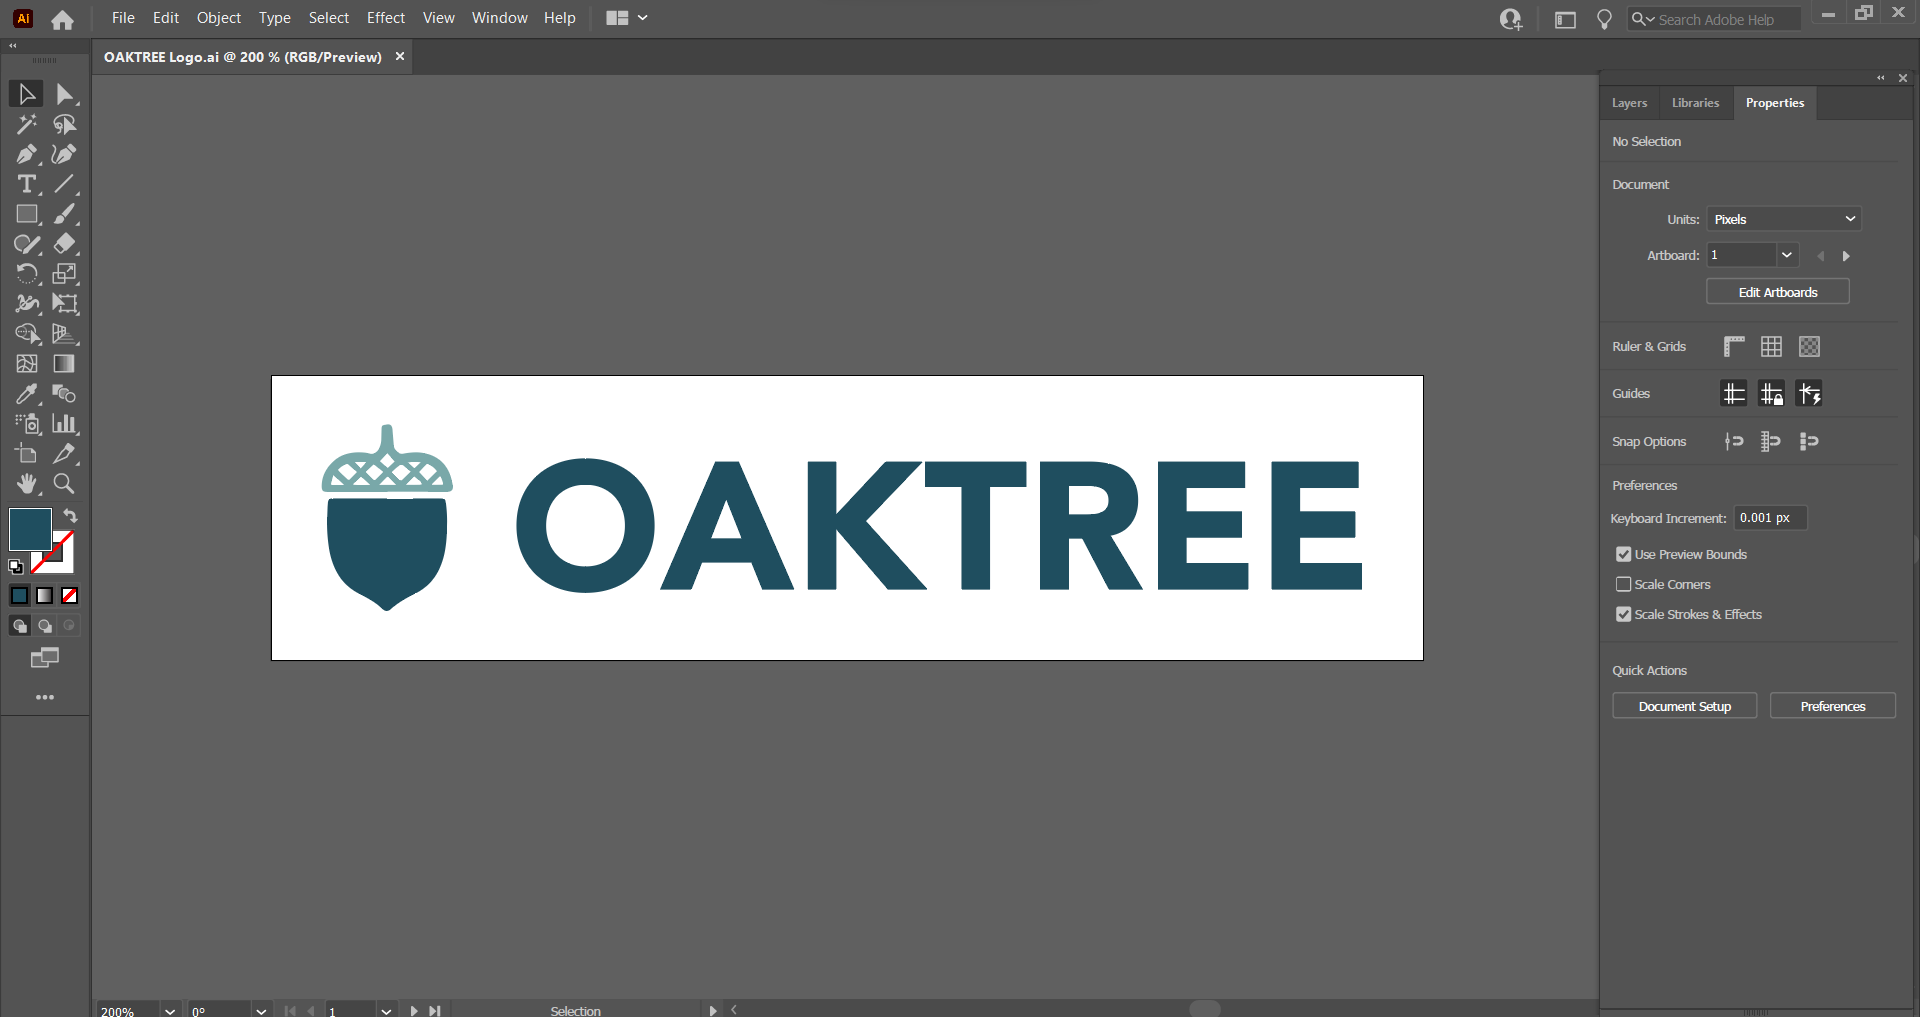 A screenshot of the finalized logo of the OAKTREE brand within Adobe Illustrator.